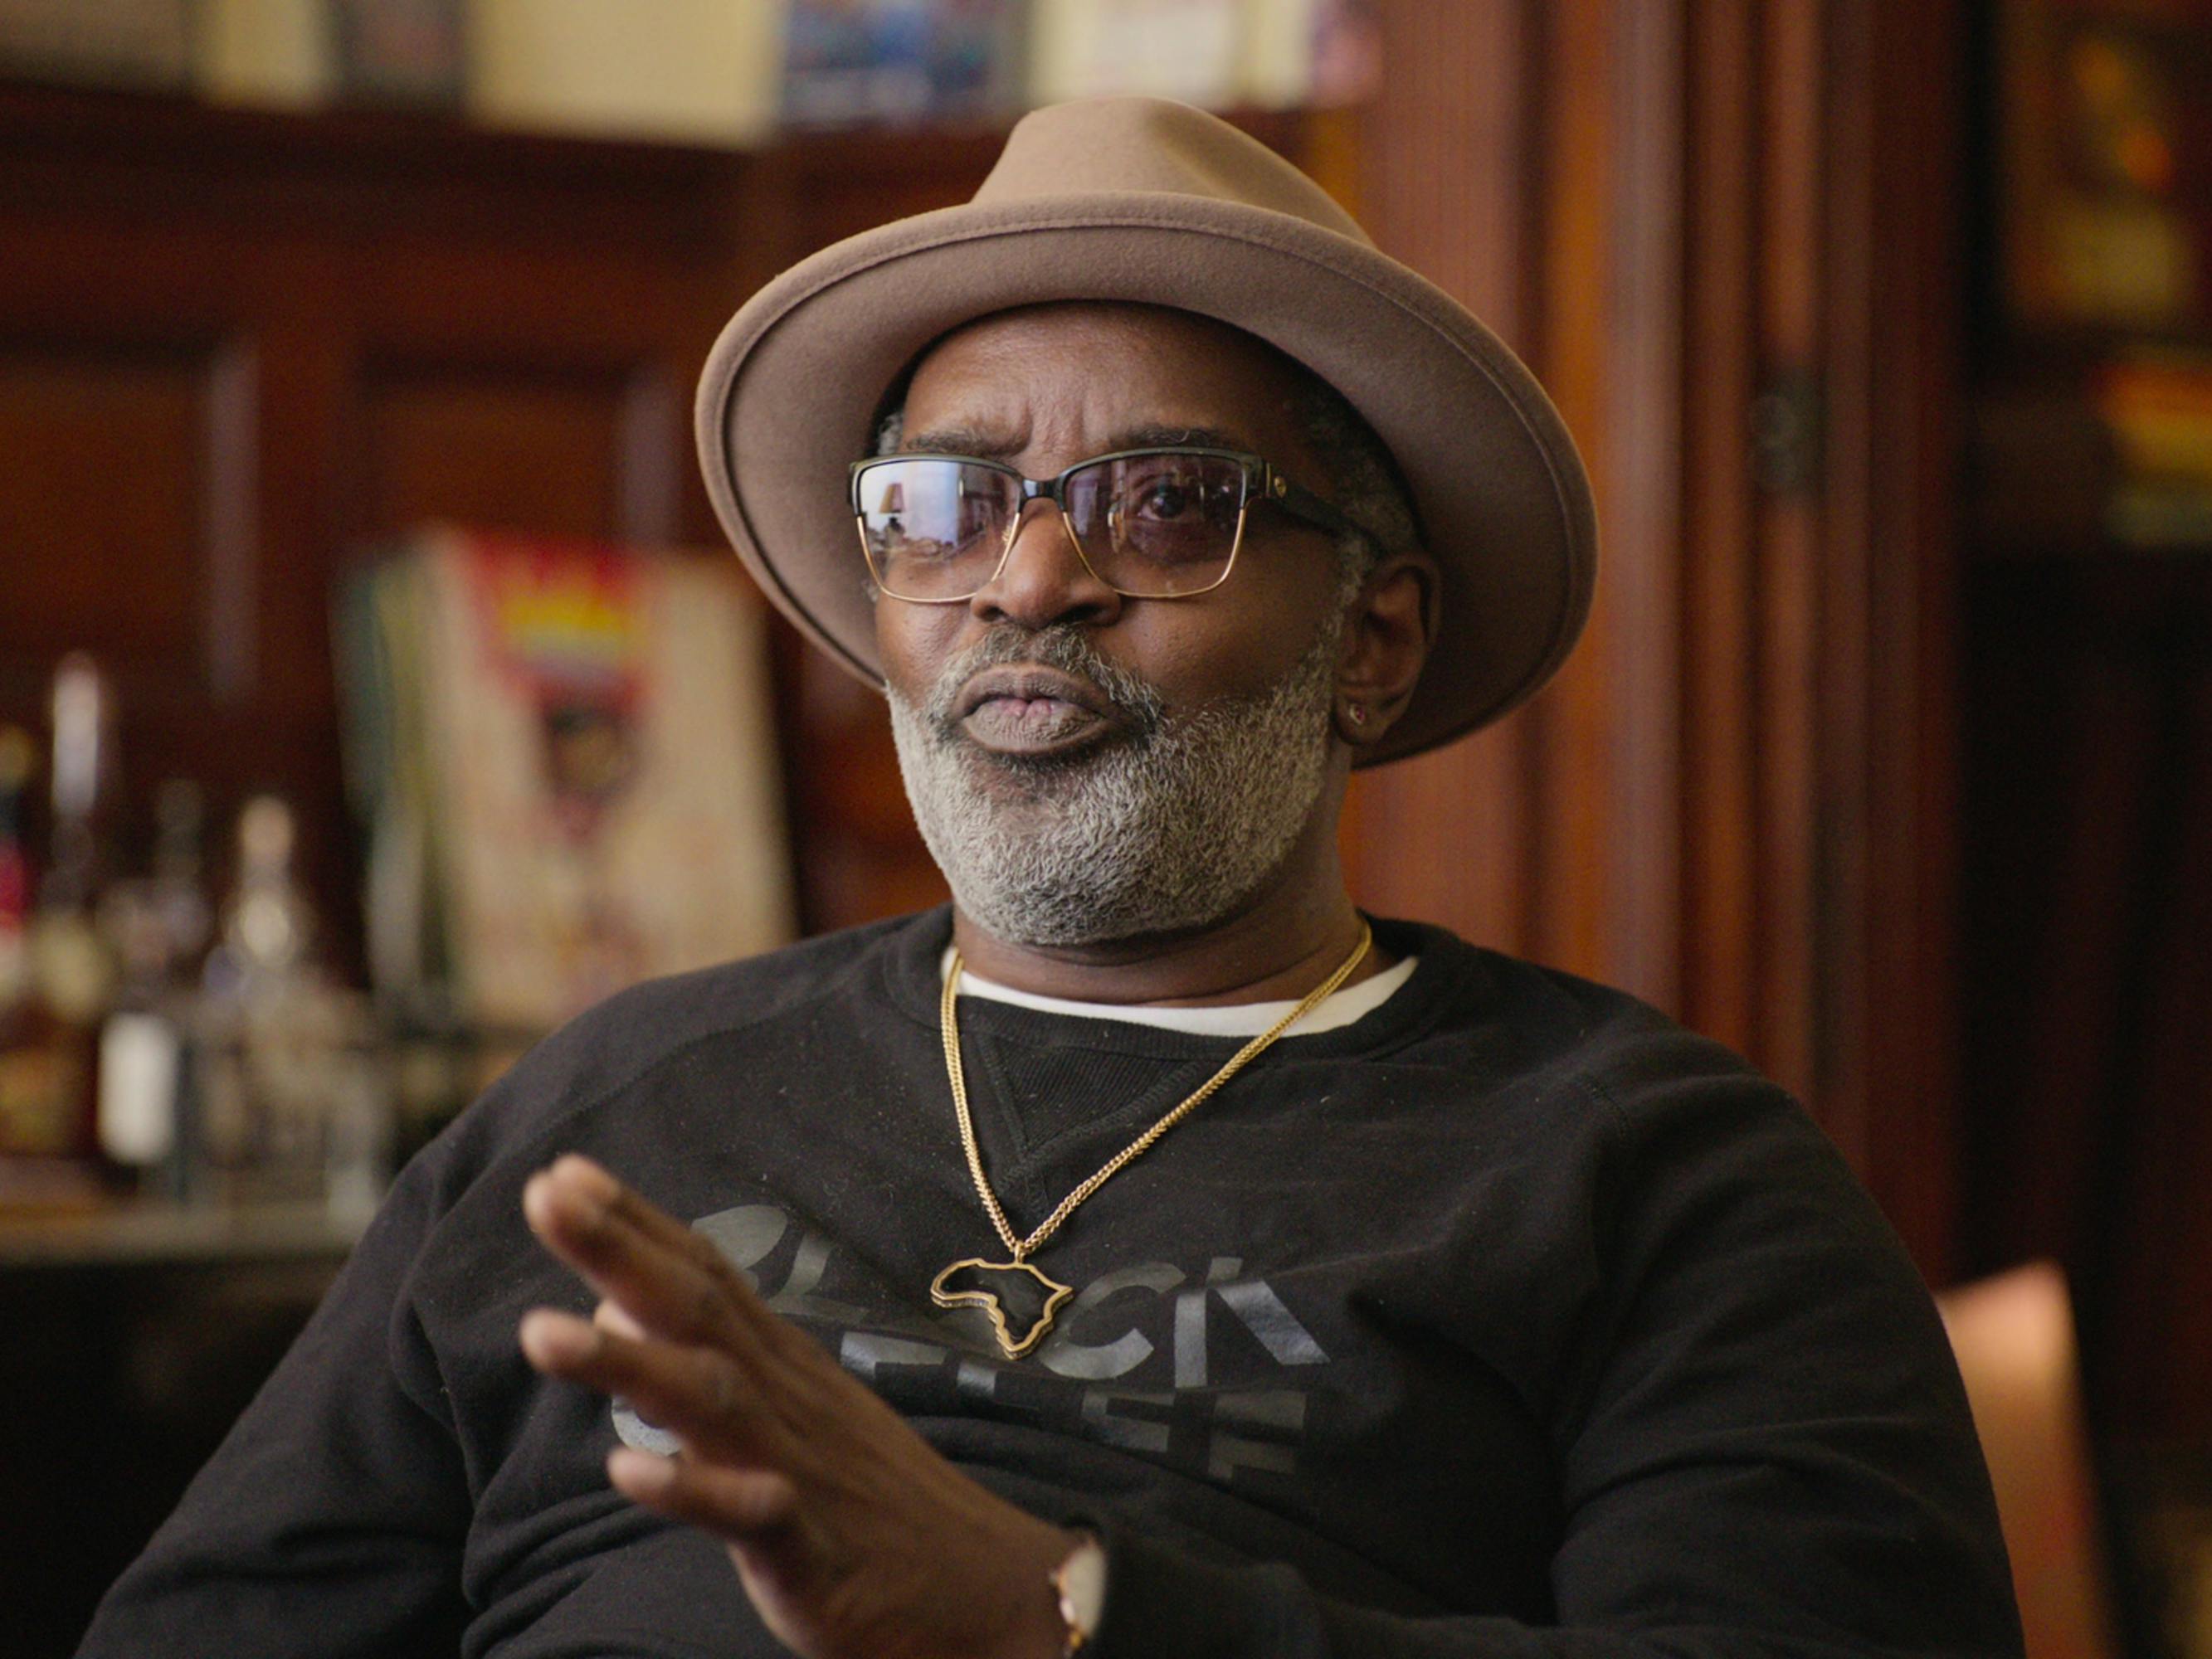 Fab 5 Freddy wears a brown hat and black shirt. He sits in a wood paneled room.